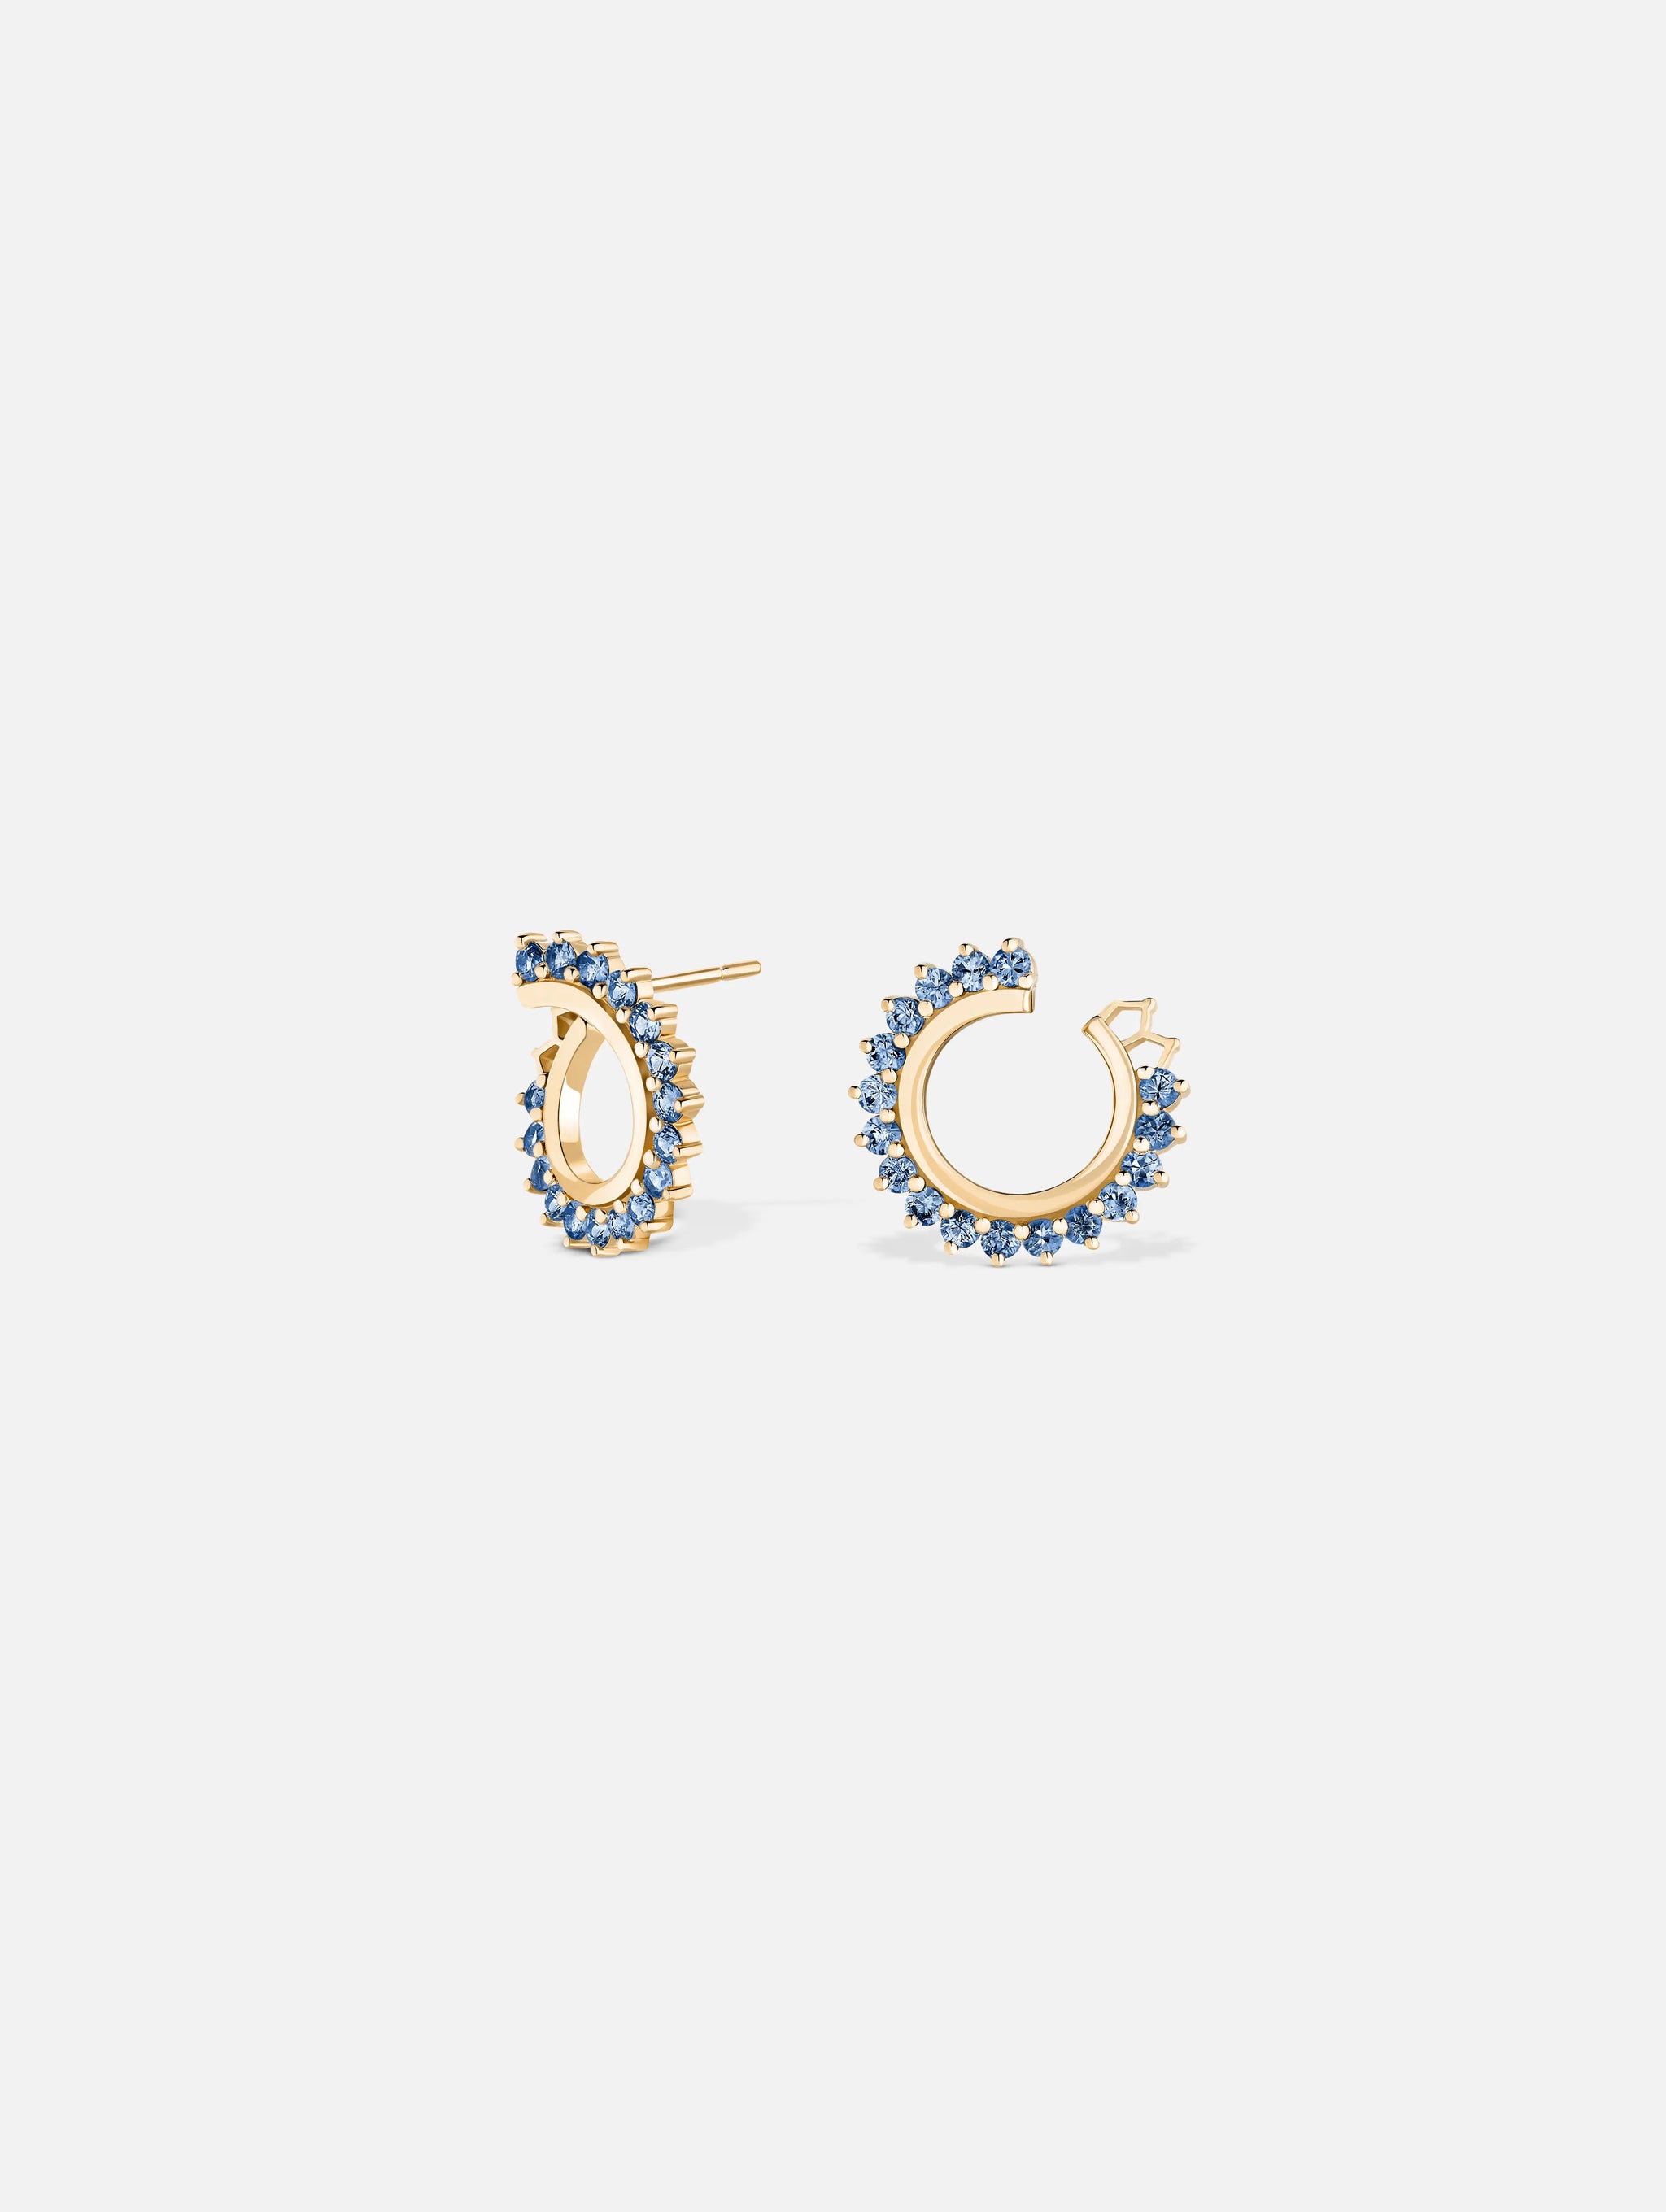 Blue Sapphire Earrings in Yellow Gold - 1 - Nouvel Heritage